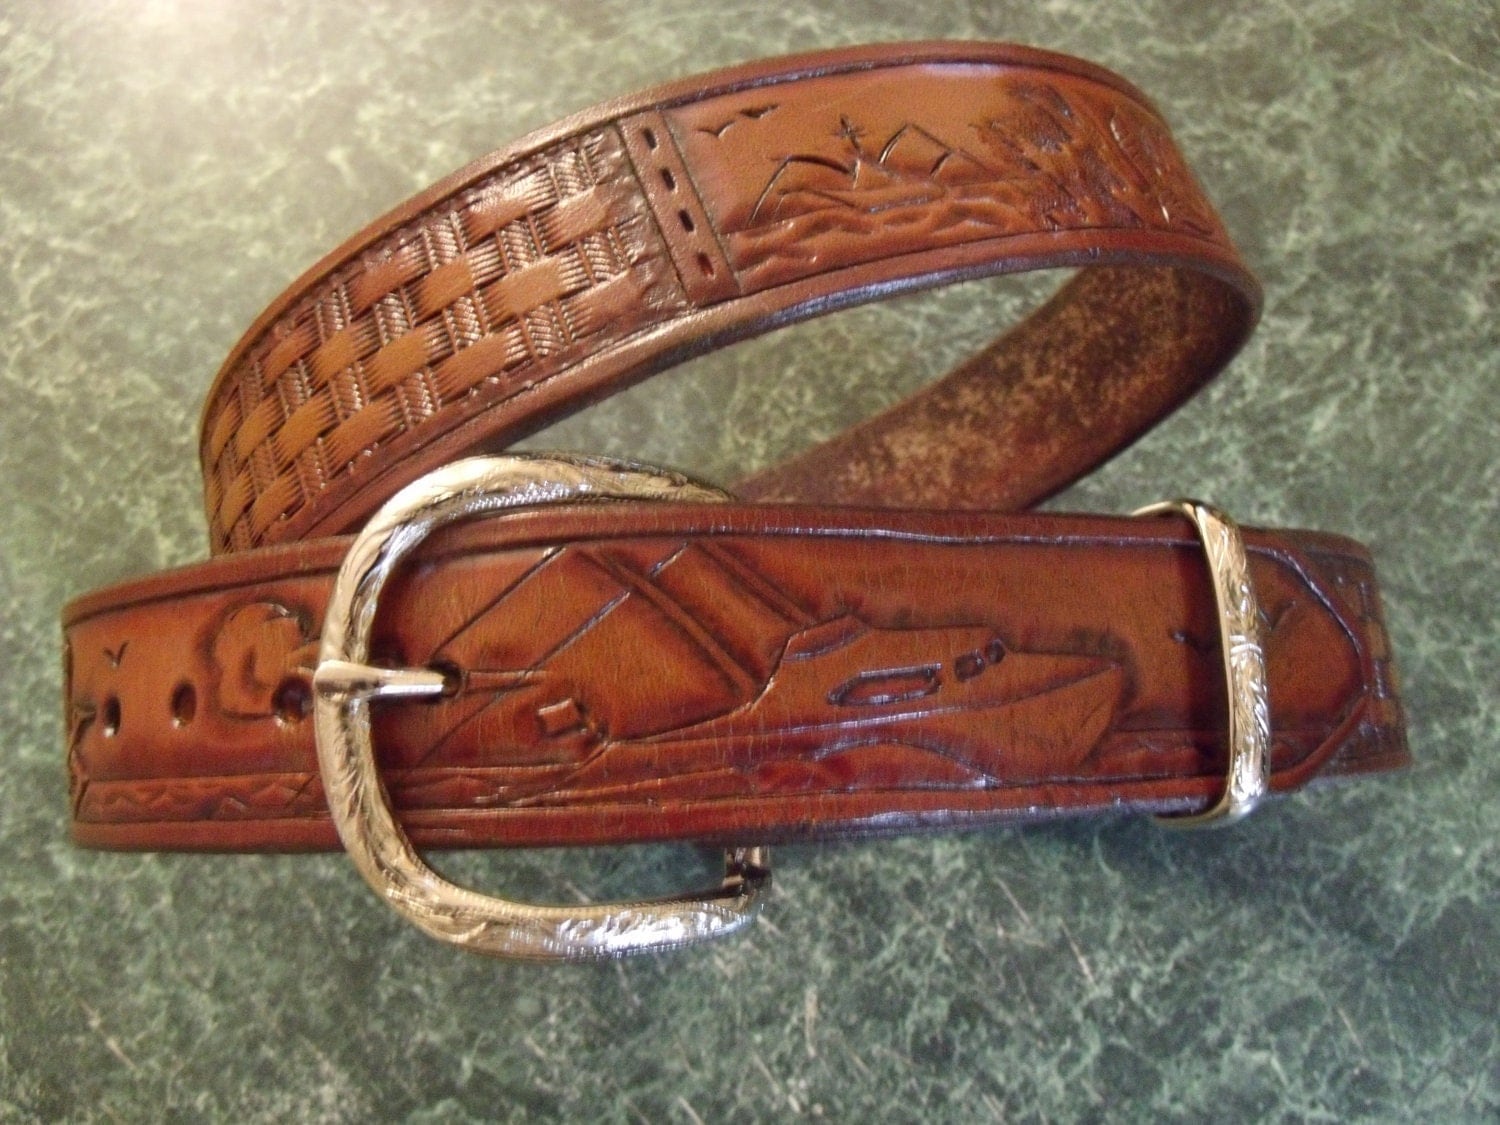 Hand tooled leather belt. Salt water fish theme with boats and